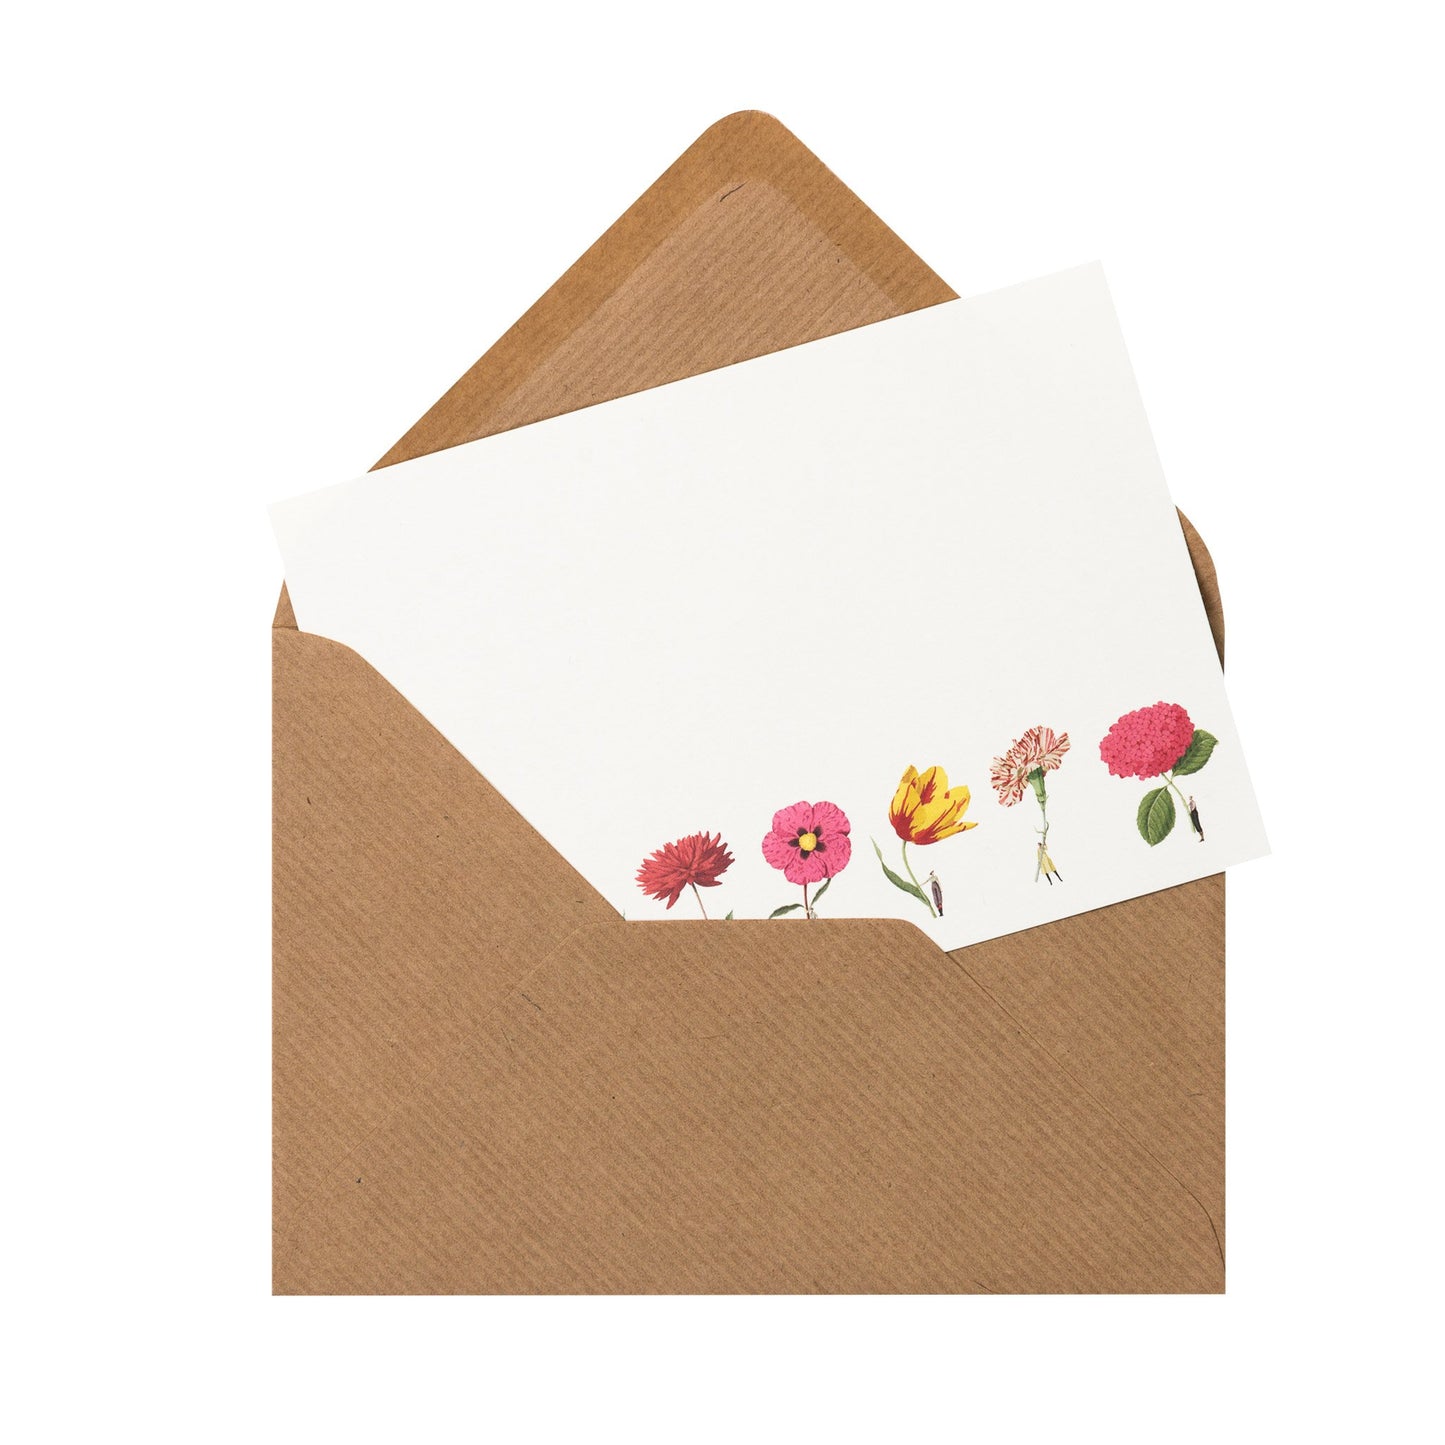 flatnotes, cards, fsc paper, made in england, illustration, flowers